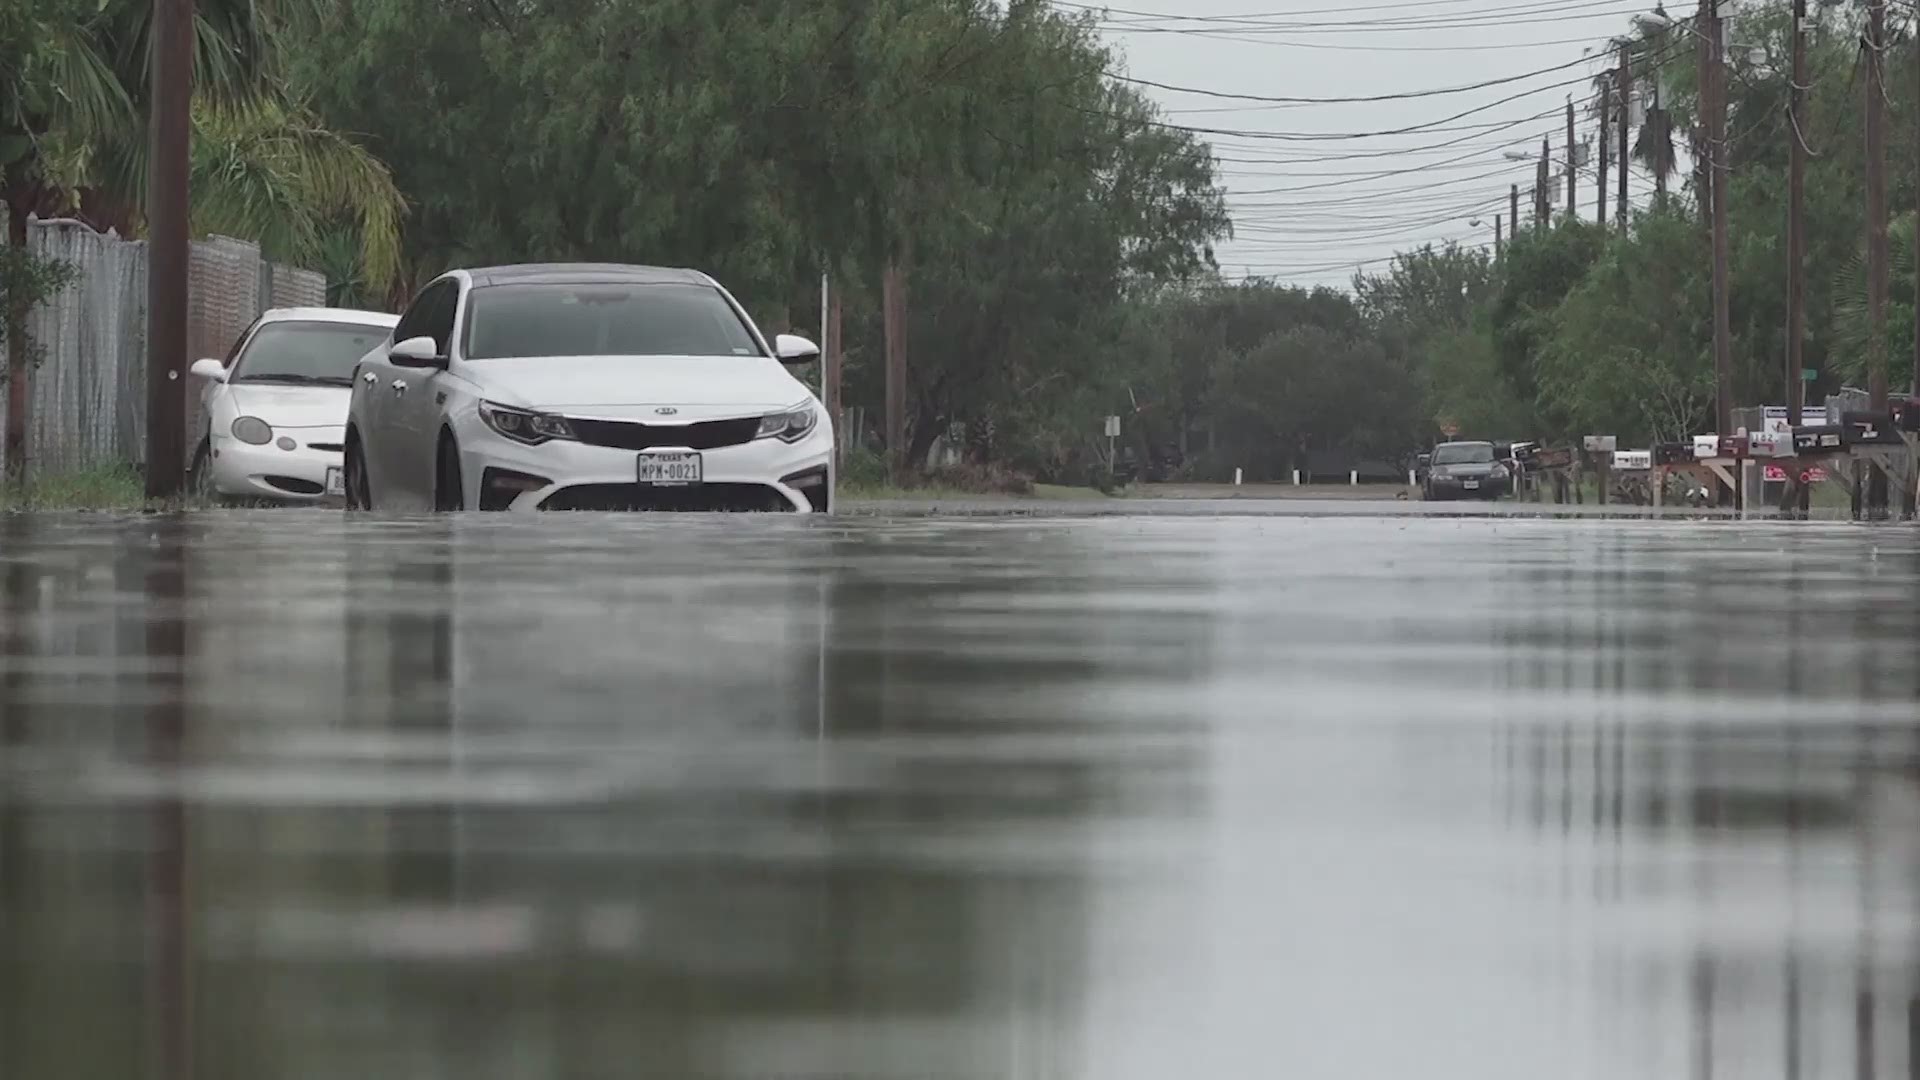 Hurricane Hanna flooded parts of the Rio Grande Valley. Mercedes opened separate shelters for coronavirus-exposed people and non-coronavirus exposed people.